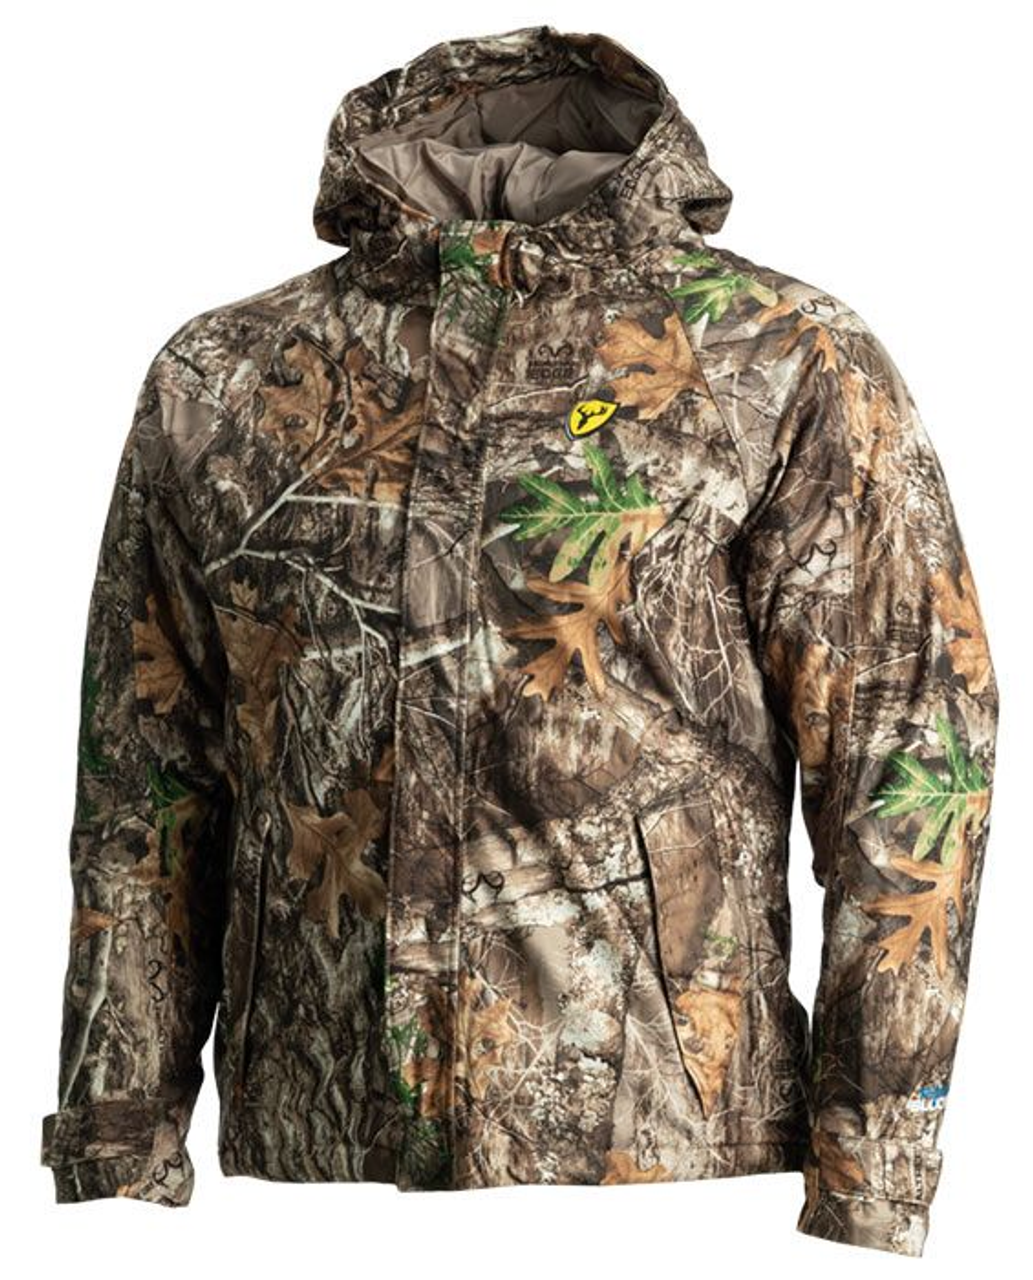 Blocker Outdoors Shield Series Drencher Insulated Jacket in Realtree Edge Camo. 1055210